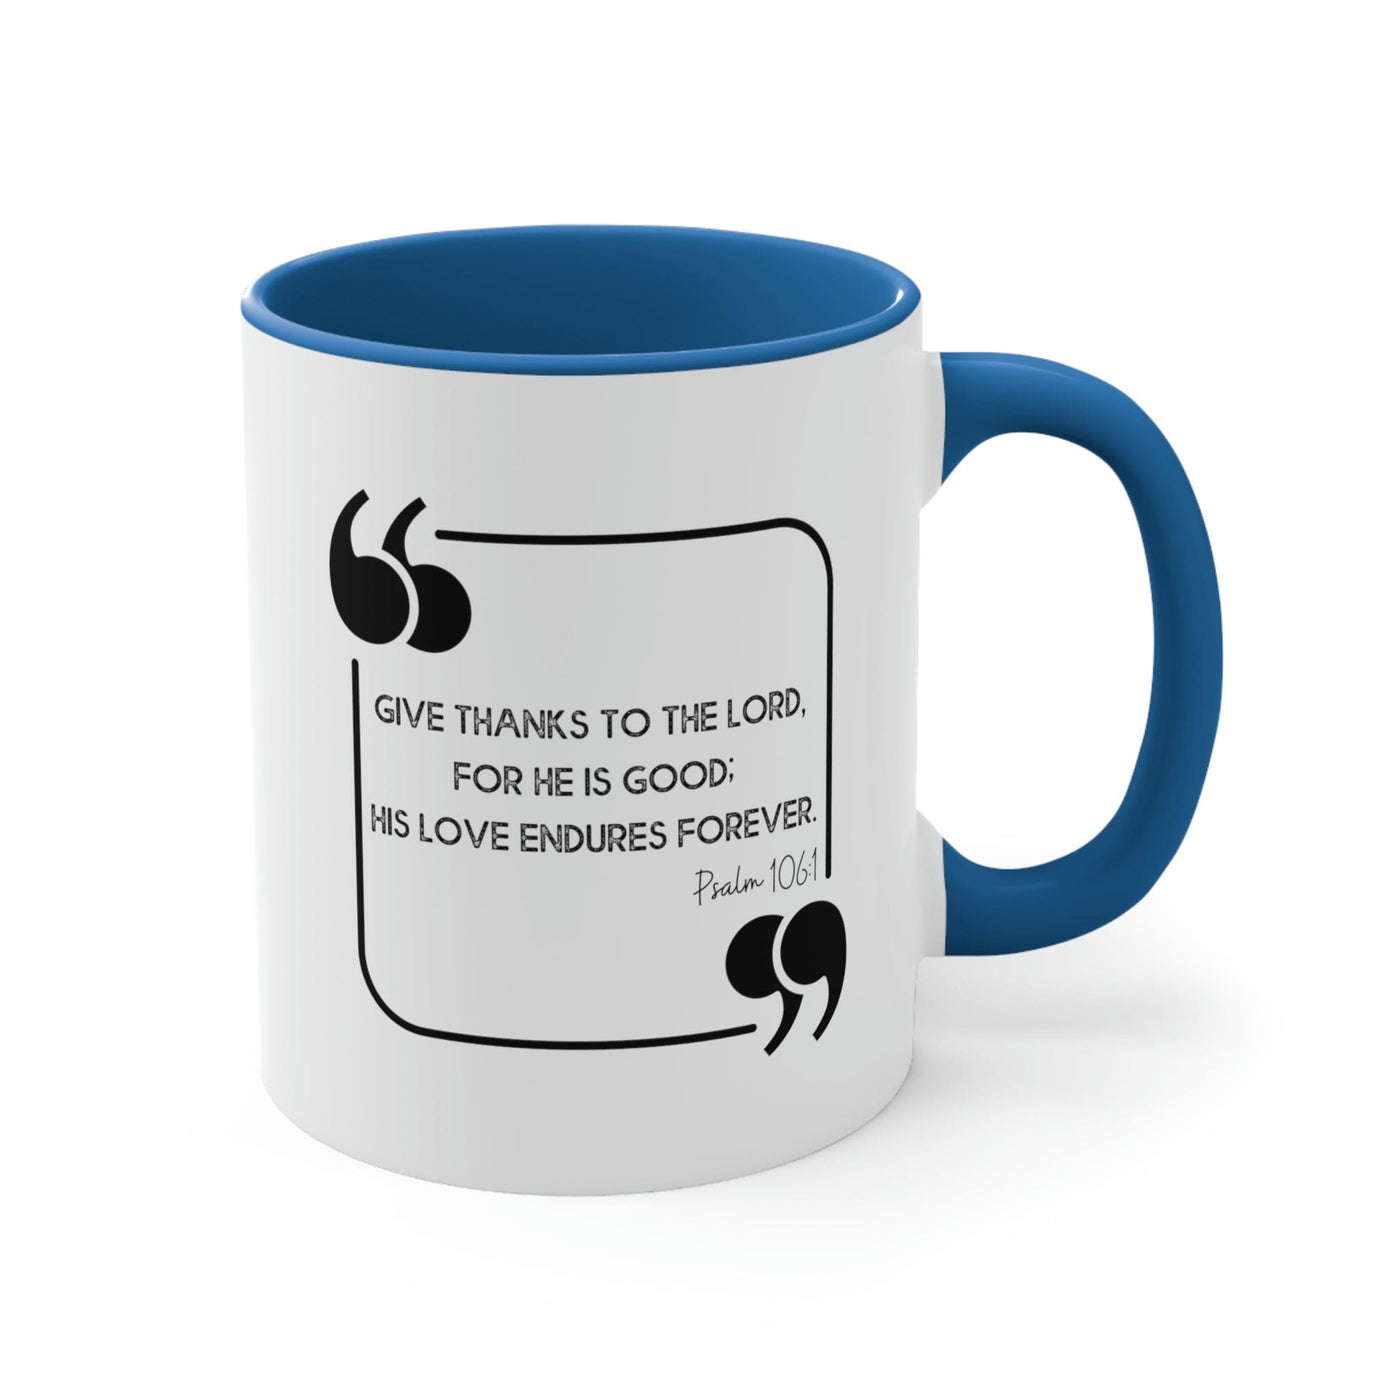 Two - tone Accent Ceramic Mug 11oz Give Thanks To The Lord Christian